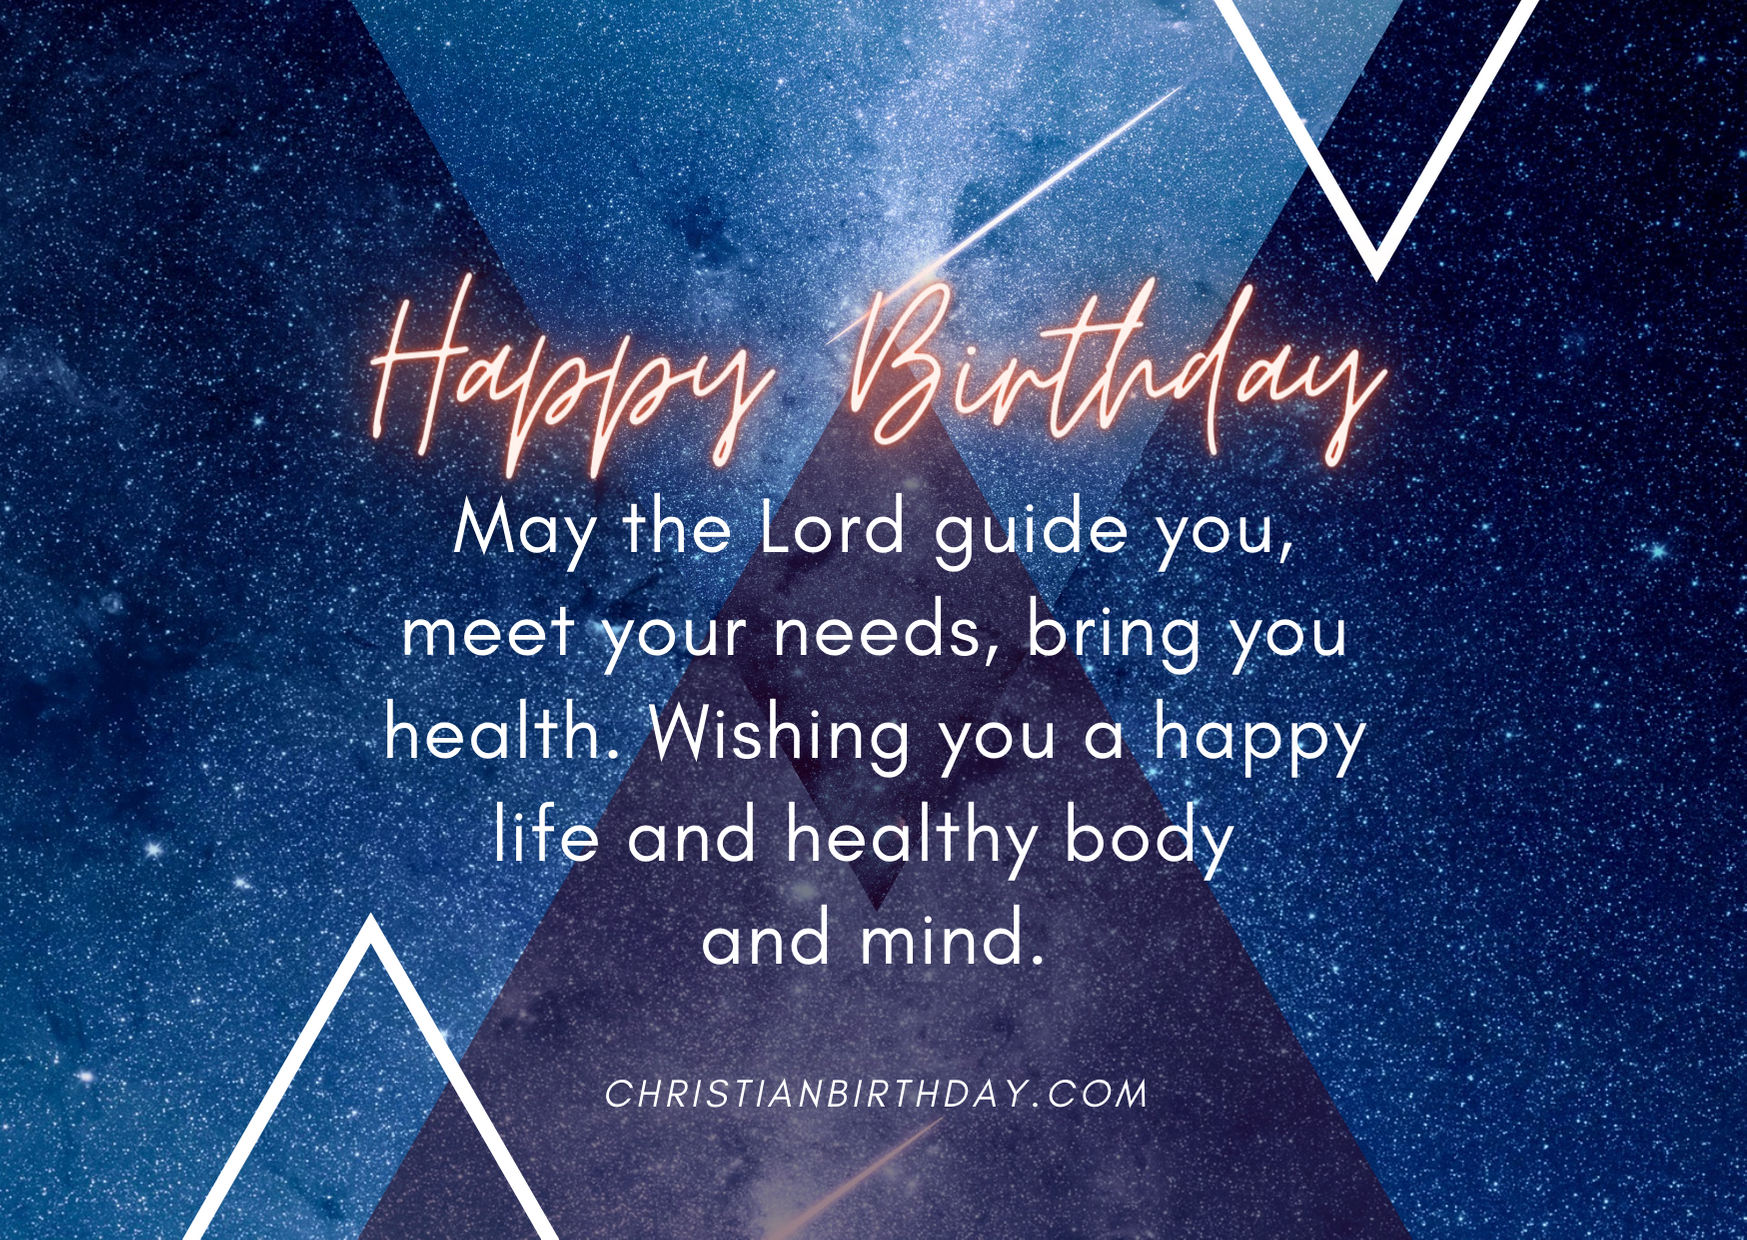 Religious Christian Birthday Wishes and Quotes ...